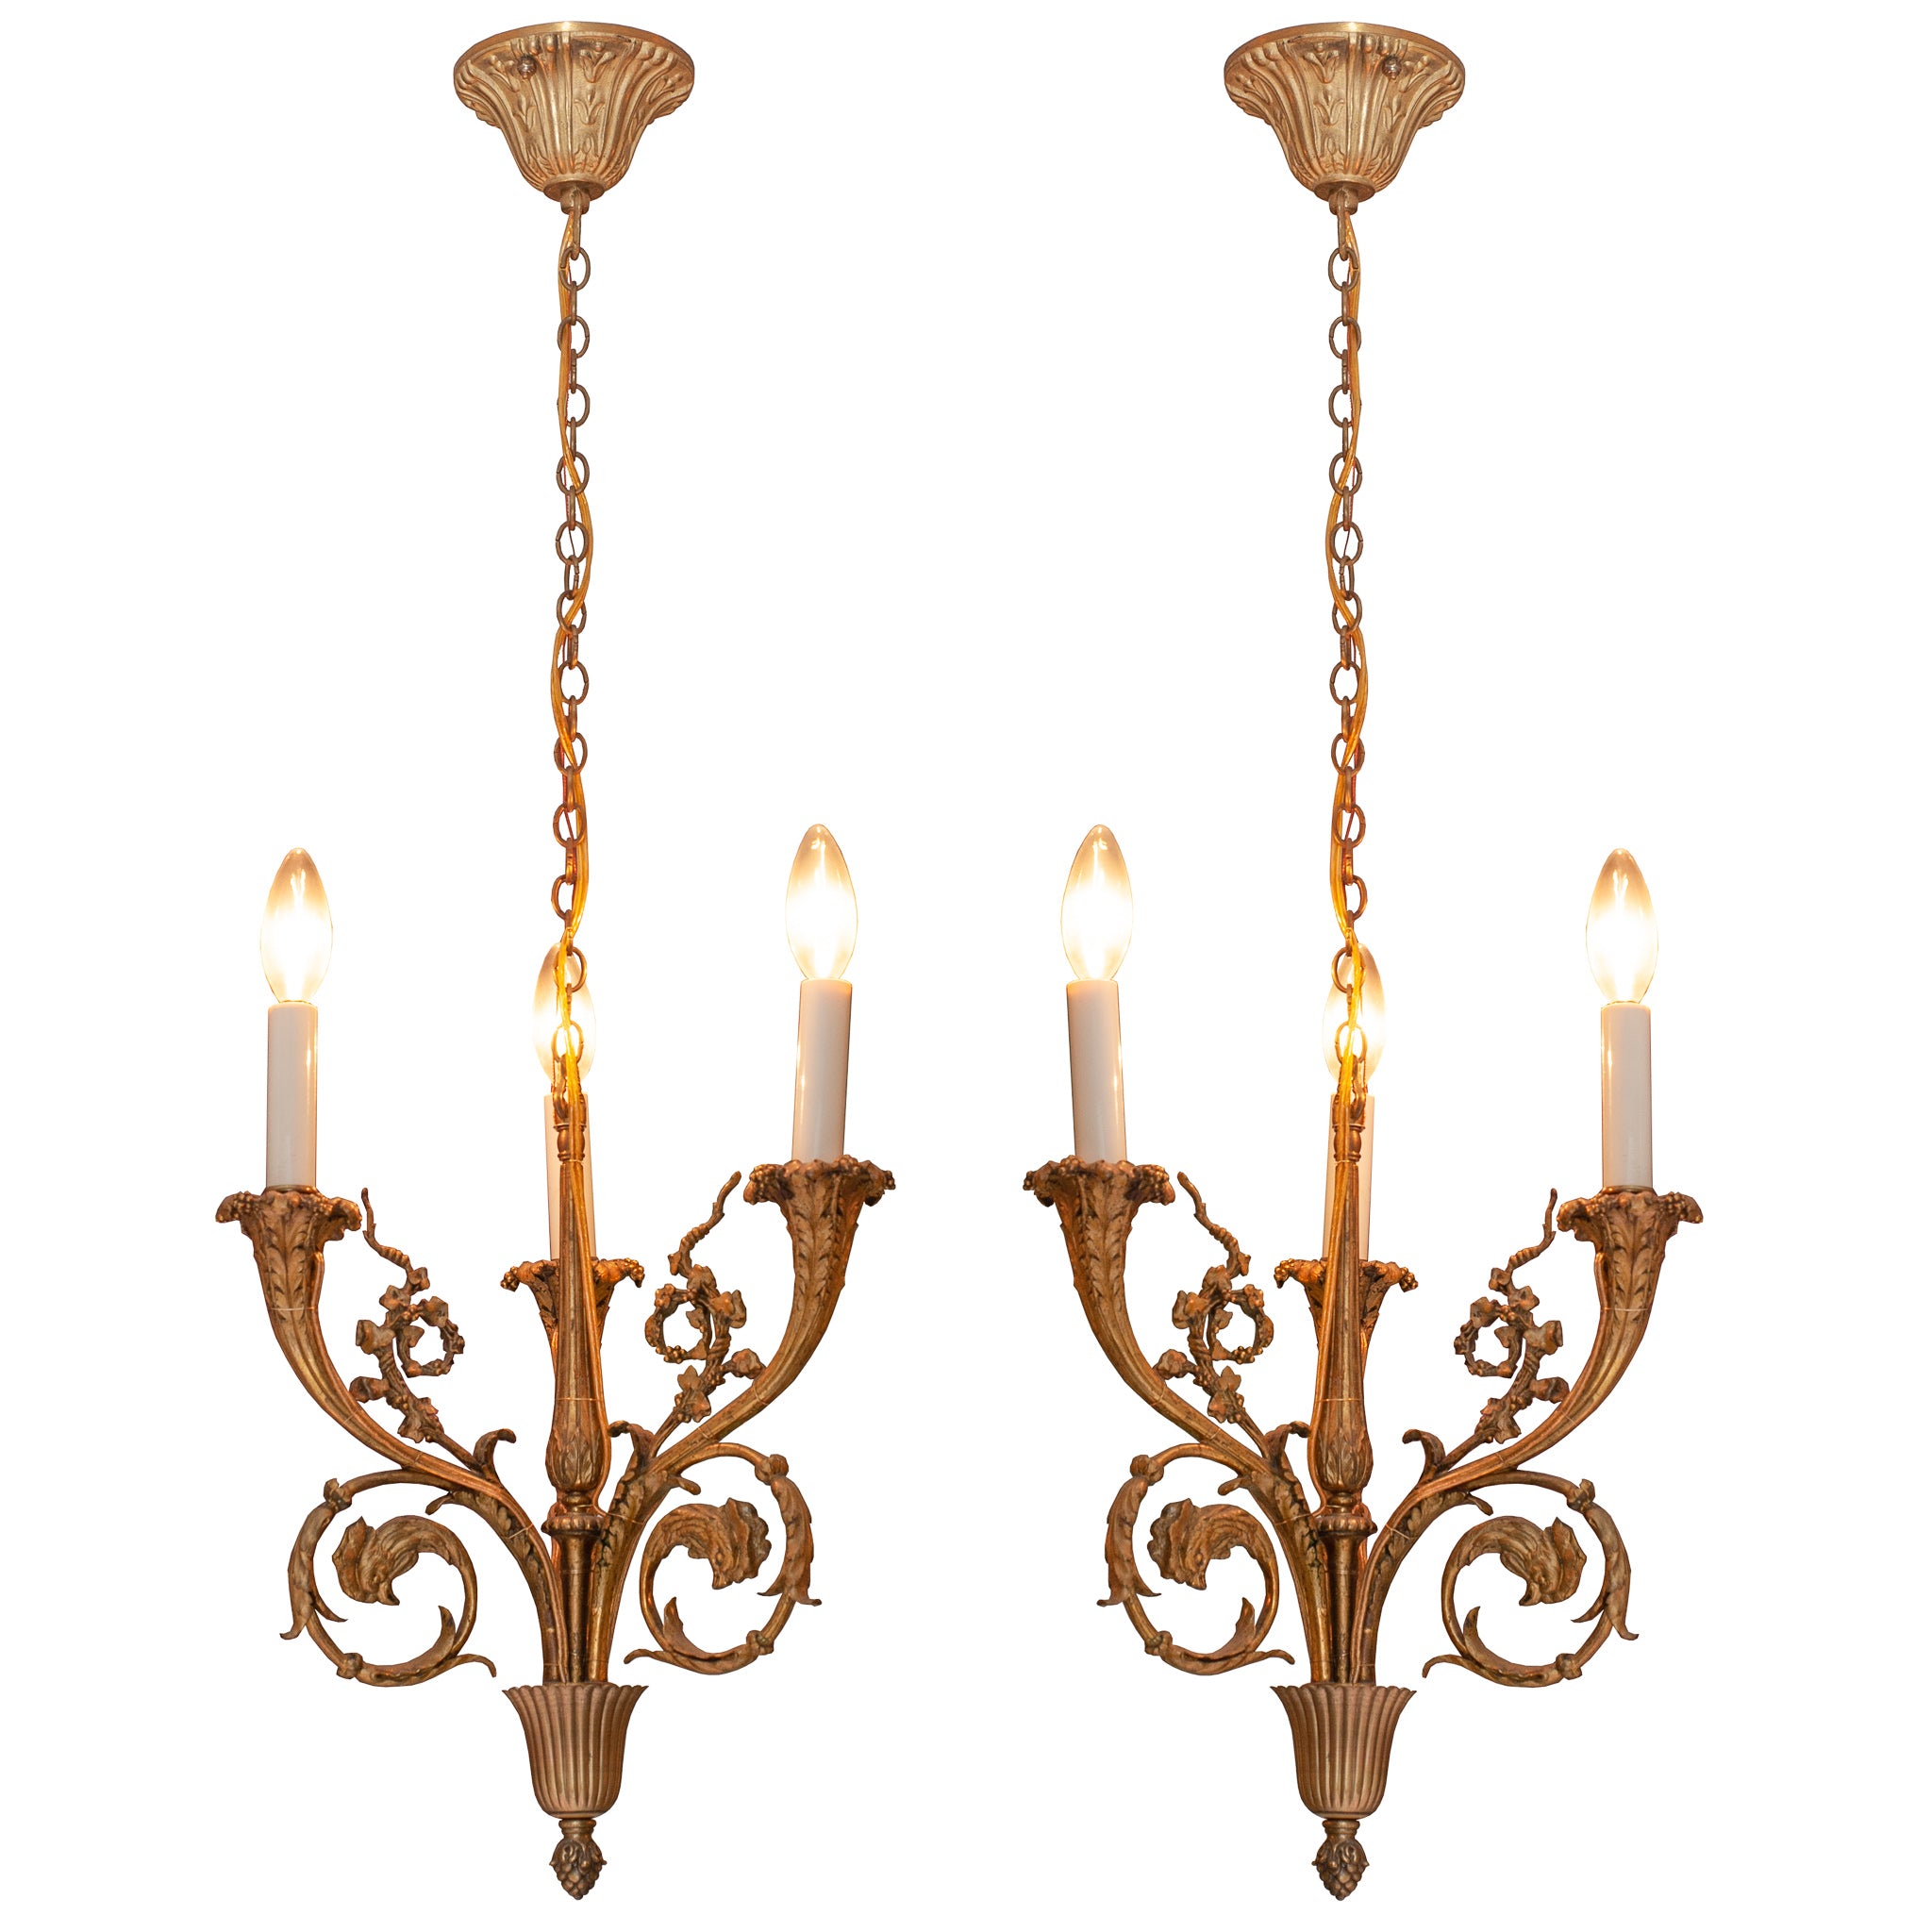 ANTIQUE PAIR OF FRENCH BRONZE CHANDELIERS WITH ROOSTER MOTIF